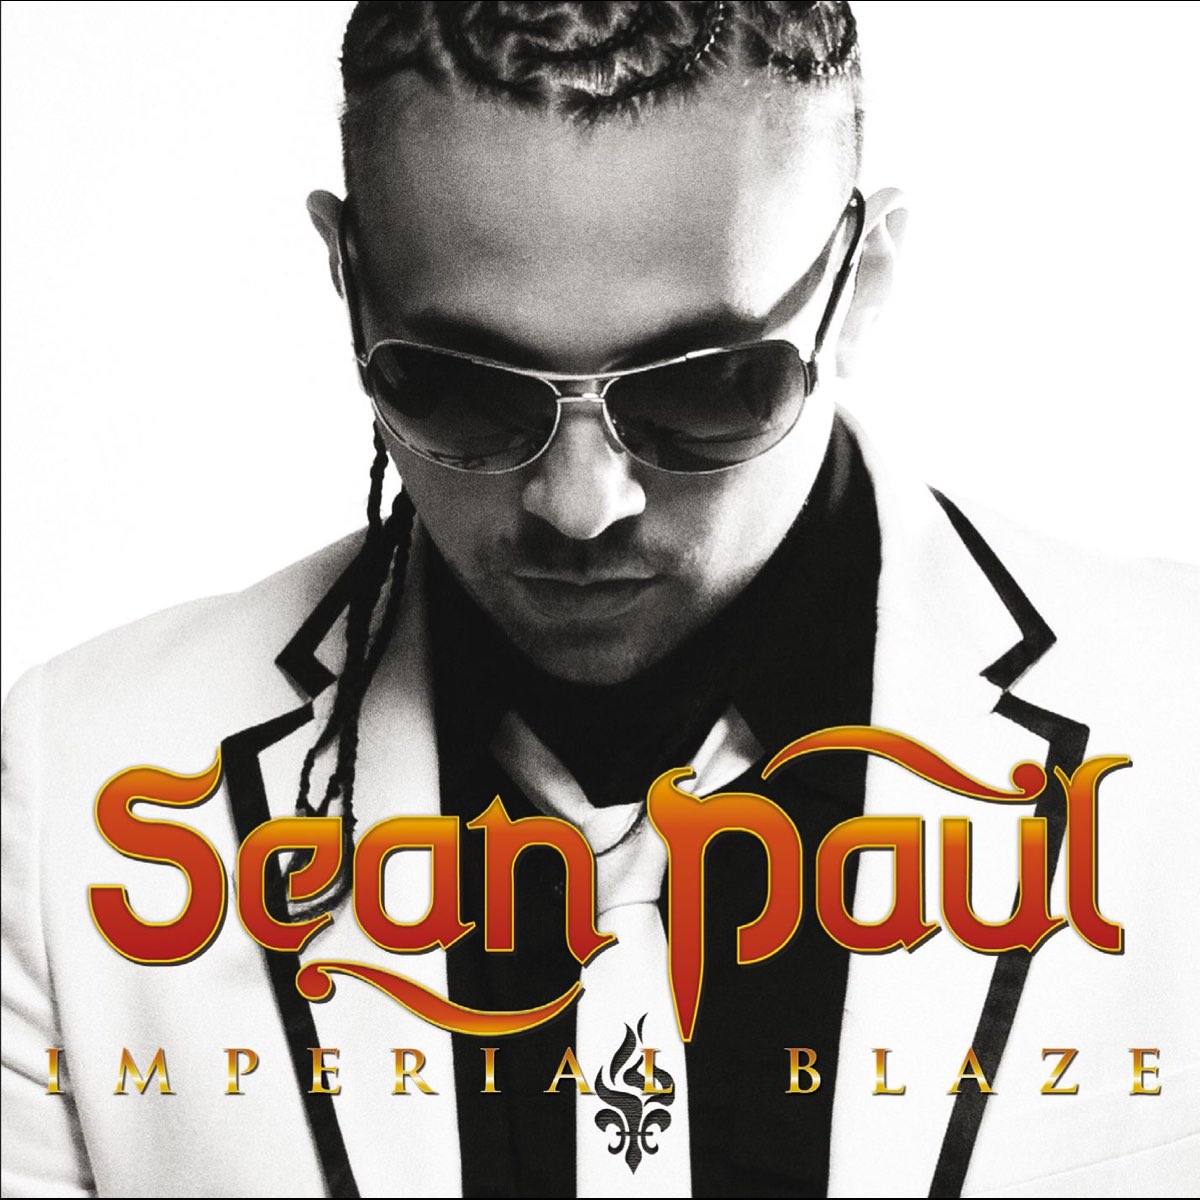 Imperial Blaze (Deluxe Version) by Sean Paul on Apple Music